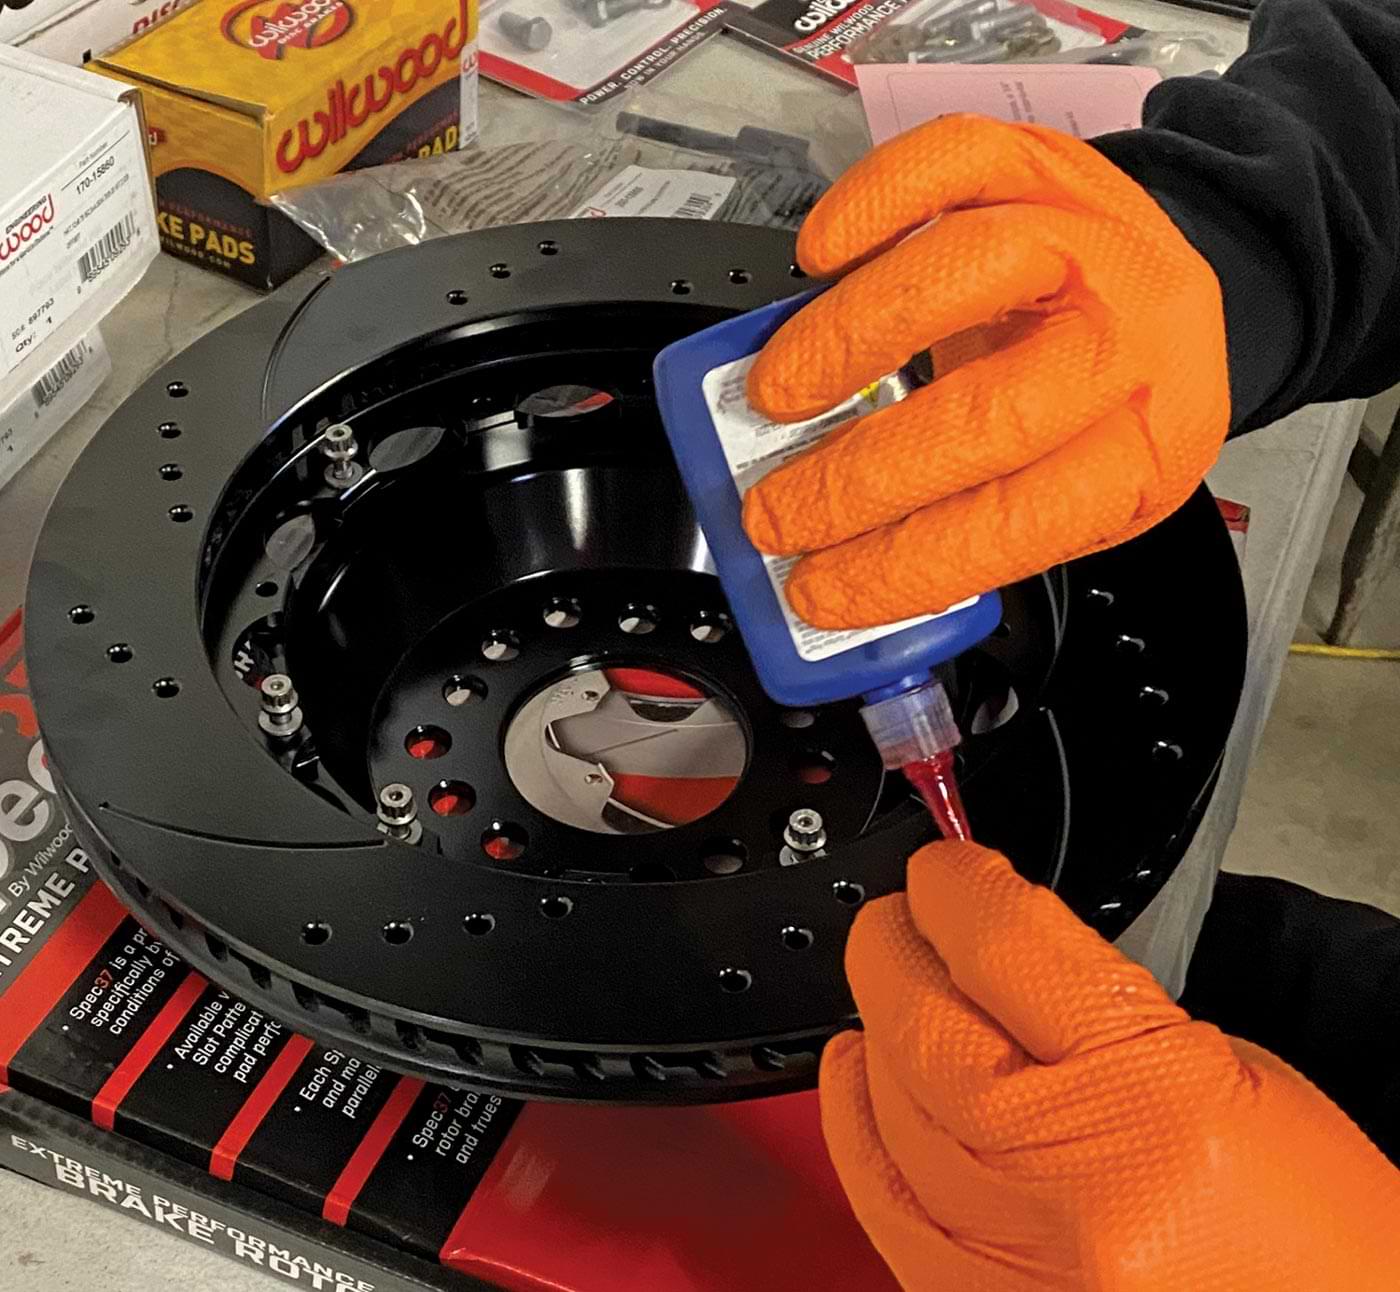 using red Loctite, the mechanic safety wires the rotor hardware